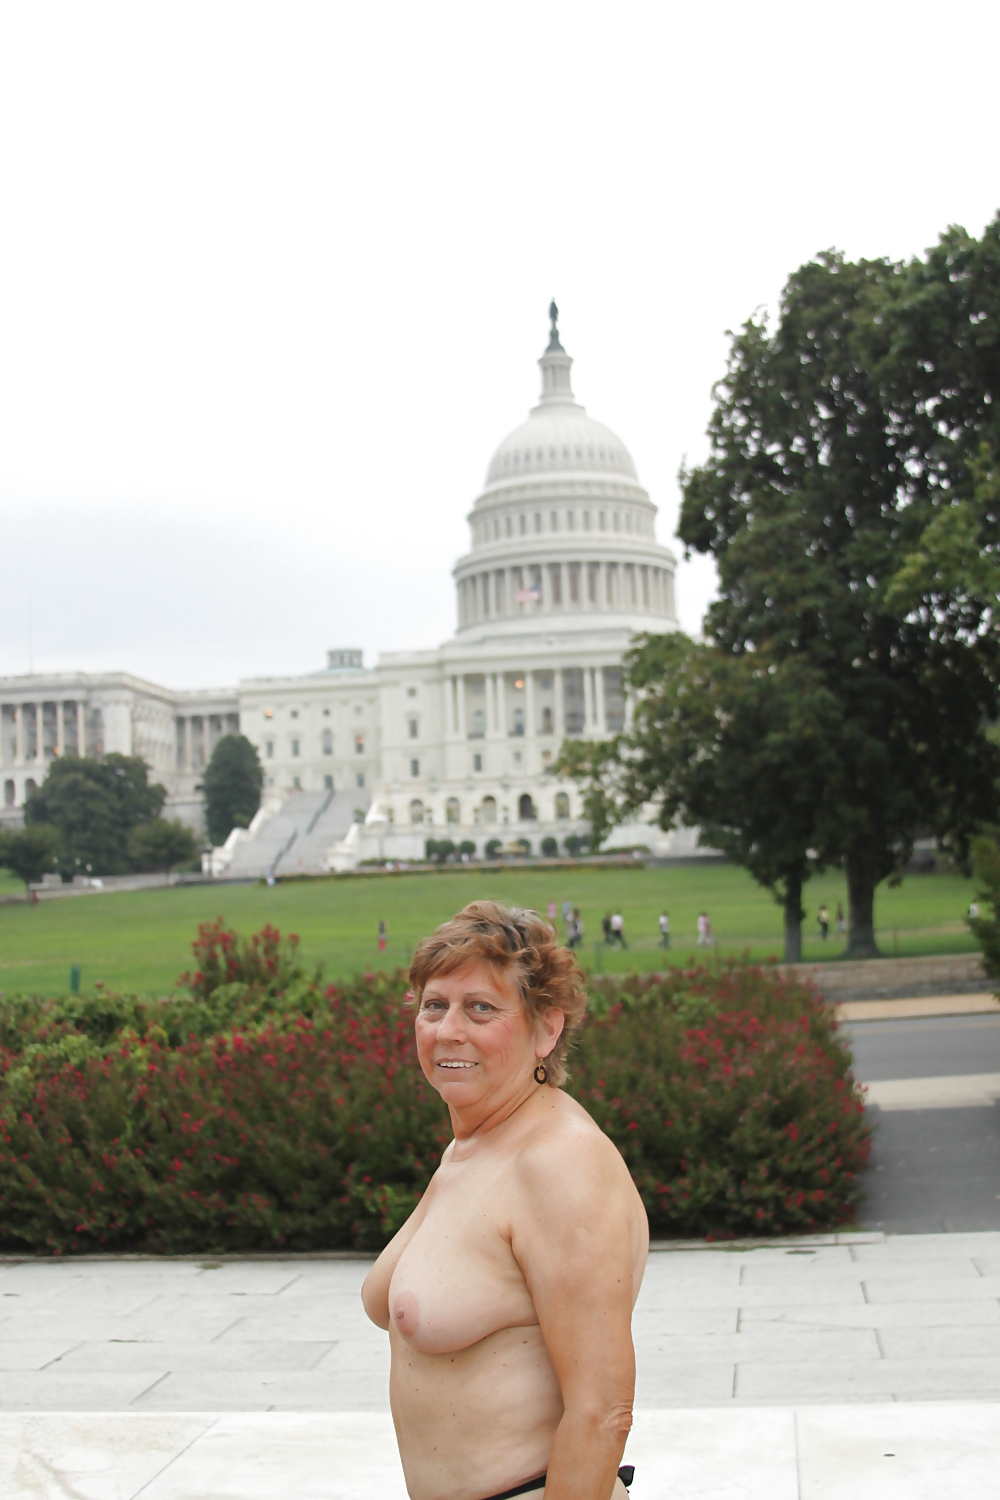 National Gehen Topless Tag In Dc - 21. August 2011 #5887780